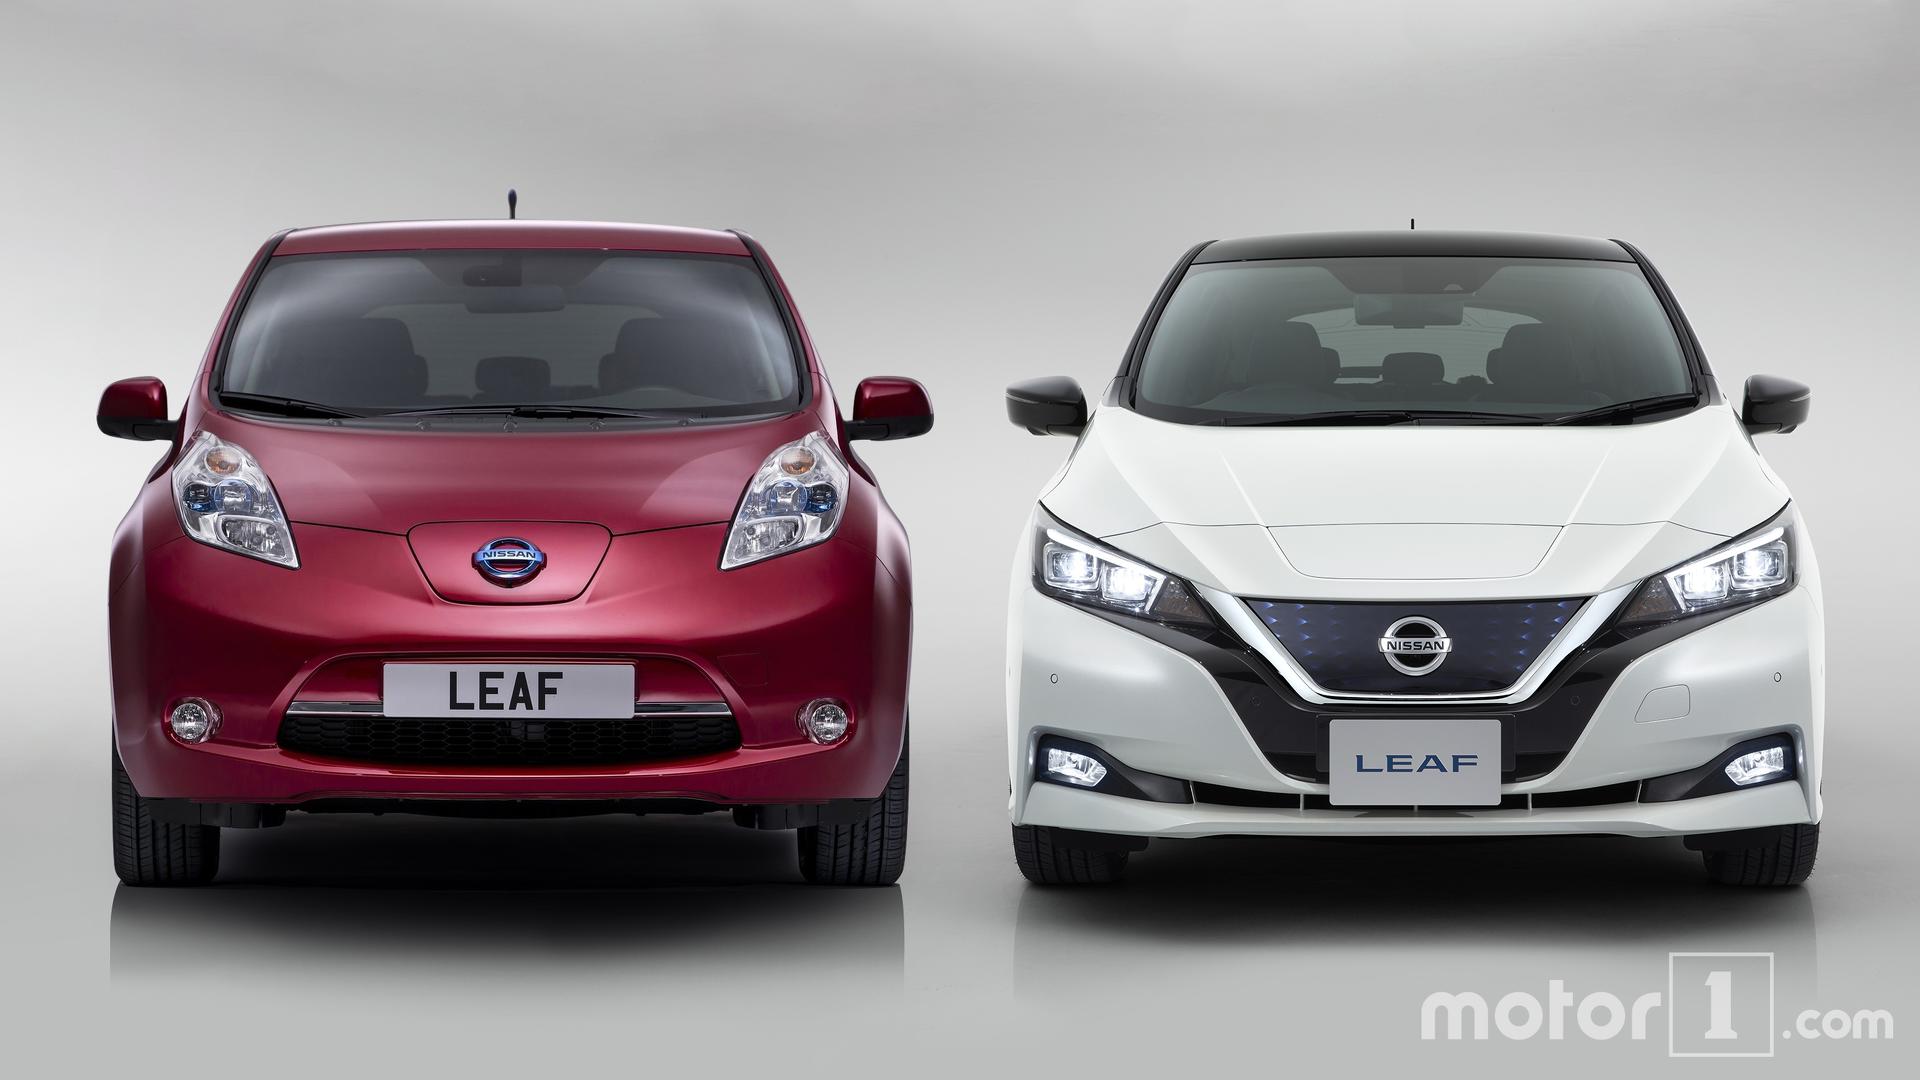 2018 Nissan Leaf: See The Changes Side-By-Side